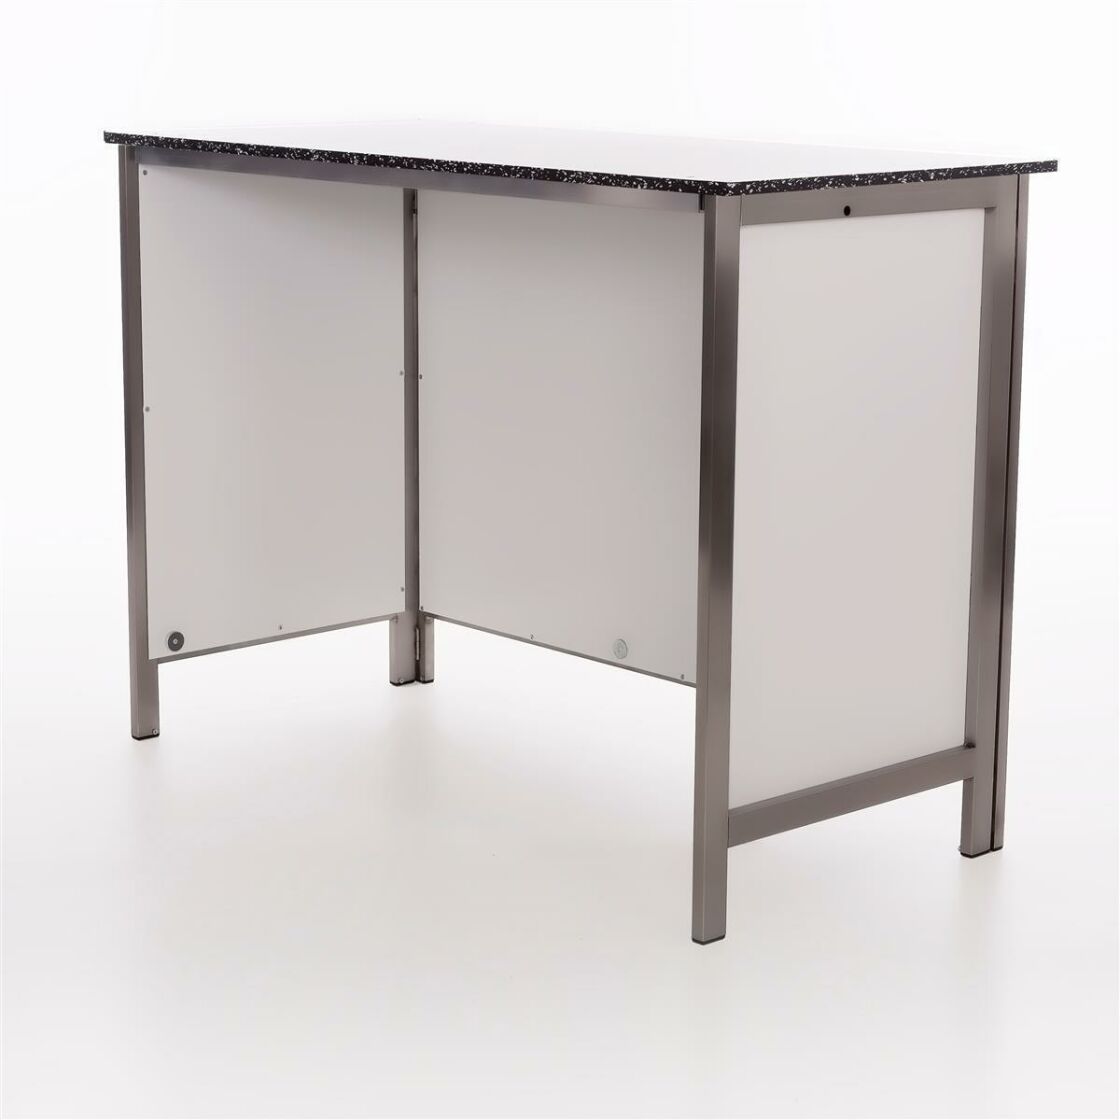 Folding Counter Made Of Stainless Steel With Pe Surface~12 